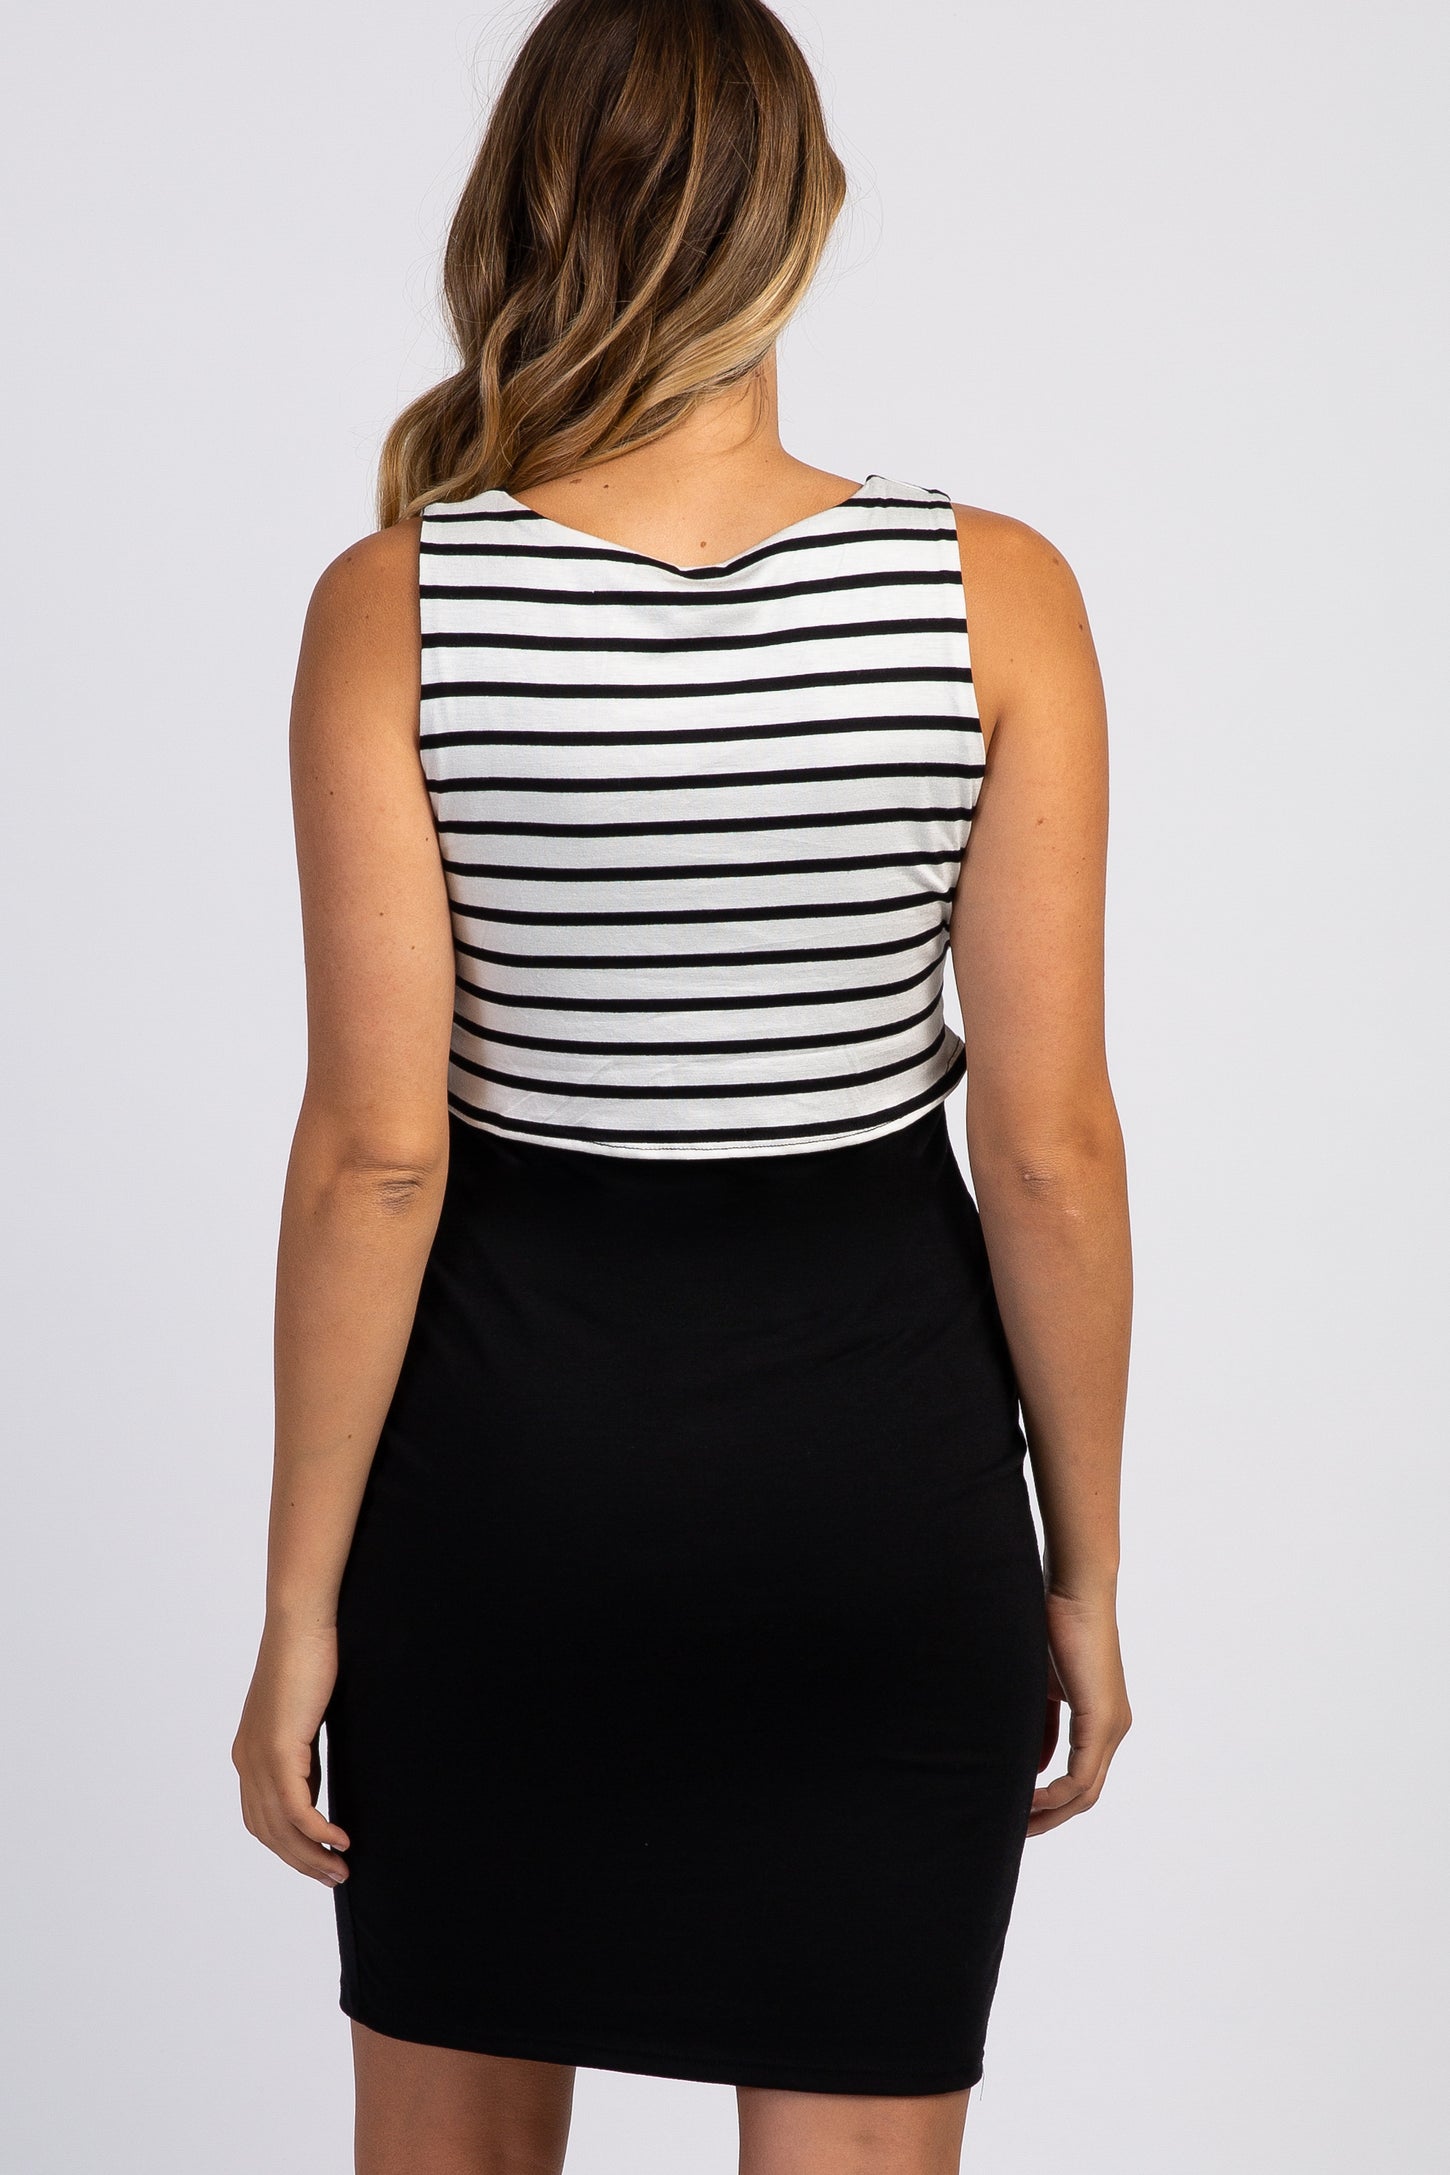 Black Striped Layered Tie Front Maternity Dress